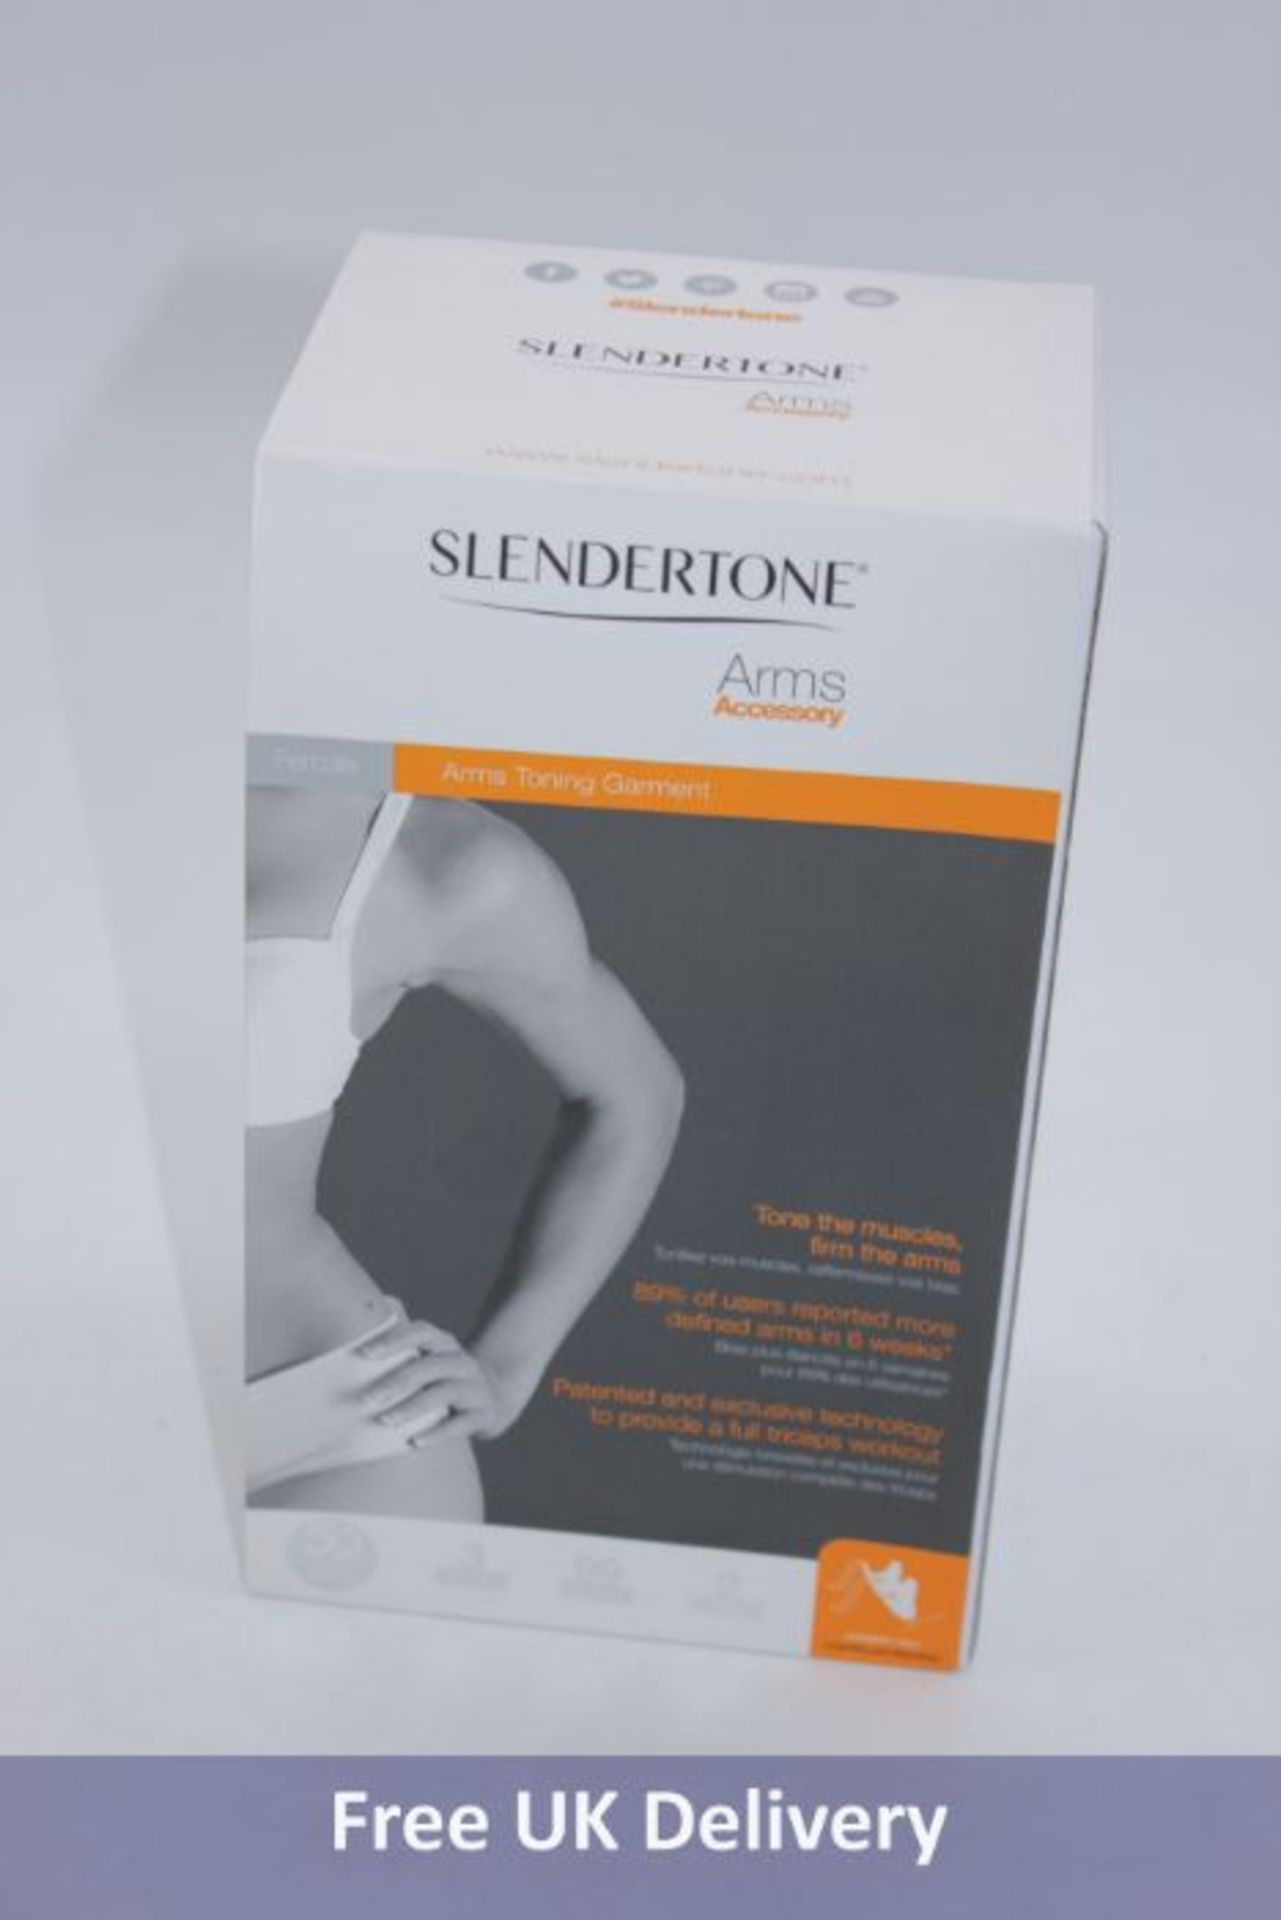 Three items of Slendertone Fitness Equipment to include 1x Female Arms Toning Garment, 1x Female Bot